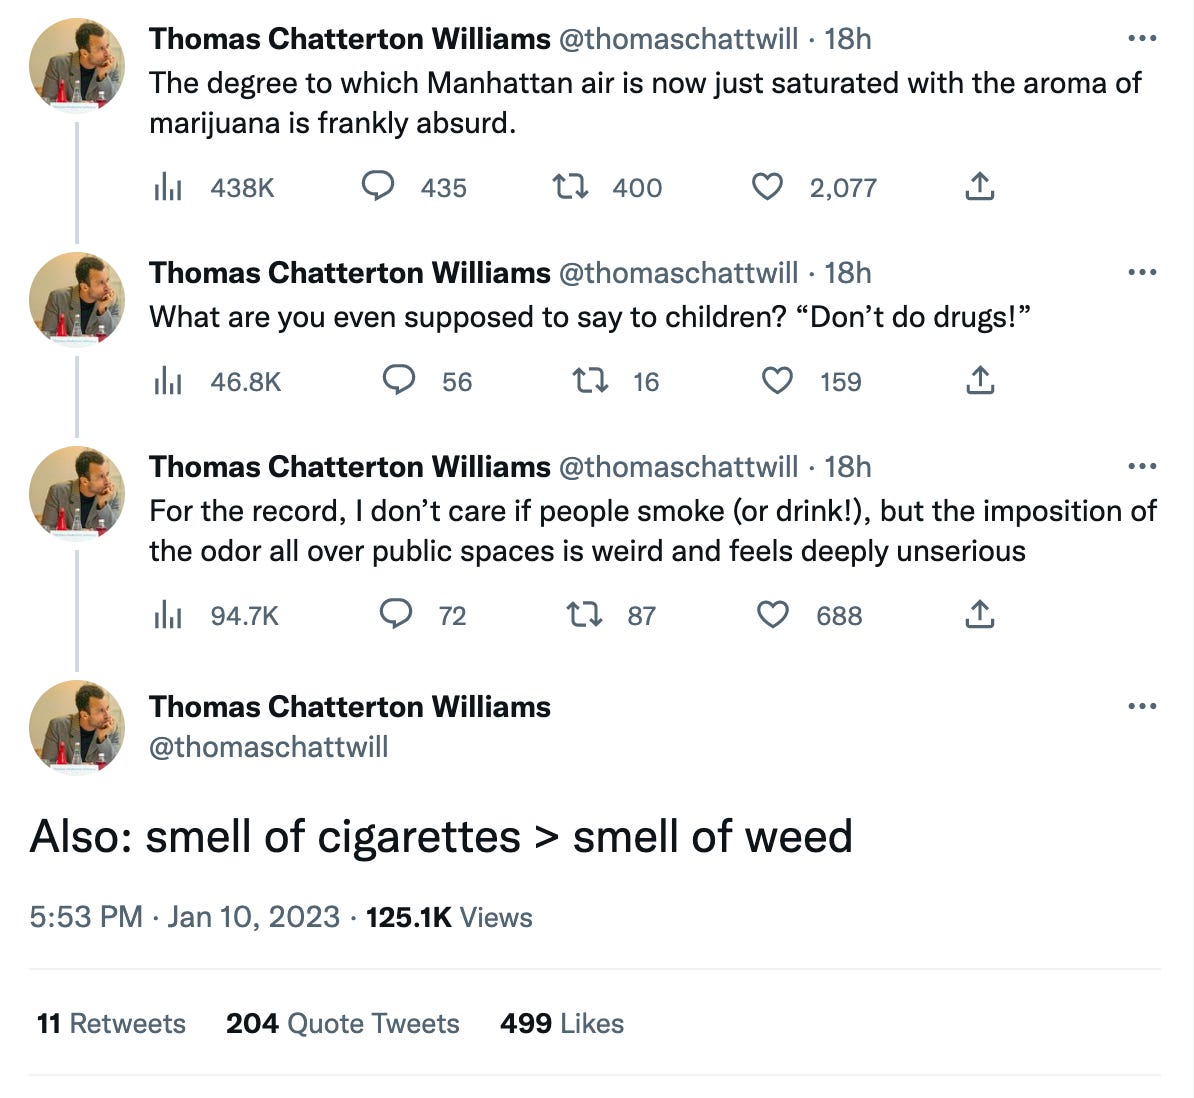 Twitter thread in which a guy says that Manhattan just smells like weed now, that he'd prefer cigarette smoke, and that the weed odor everywhere "is weird and feels deeply unserious"